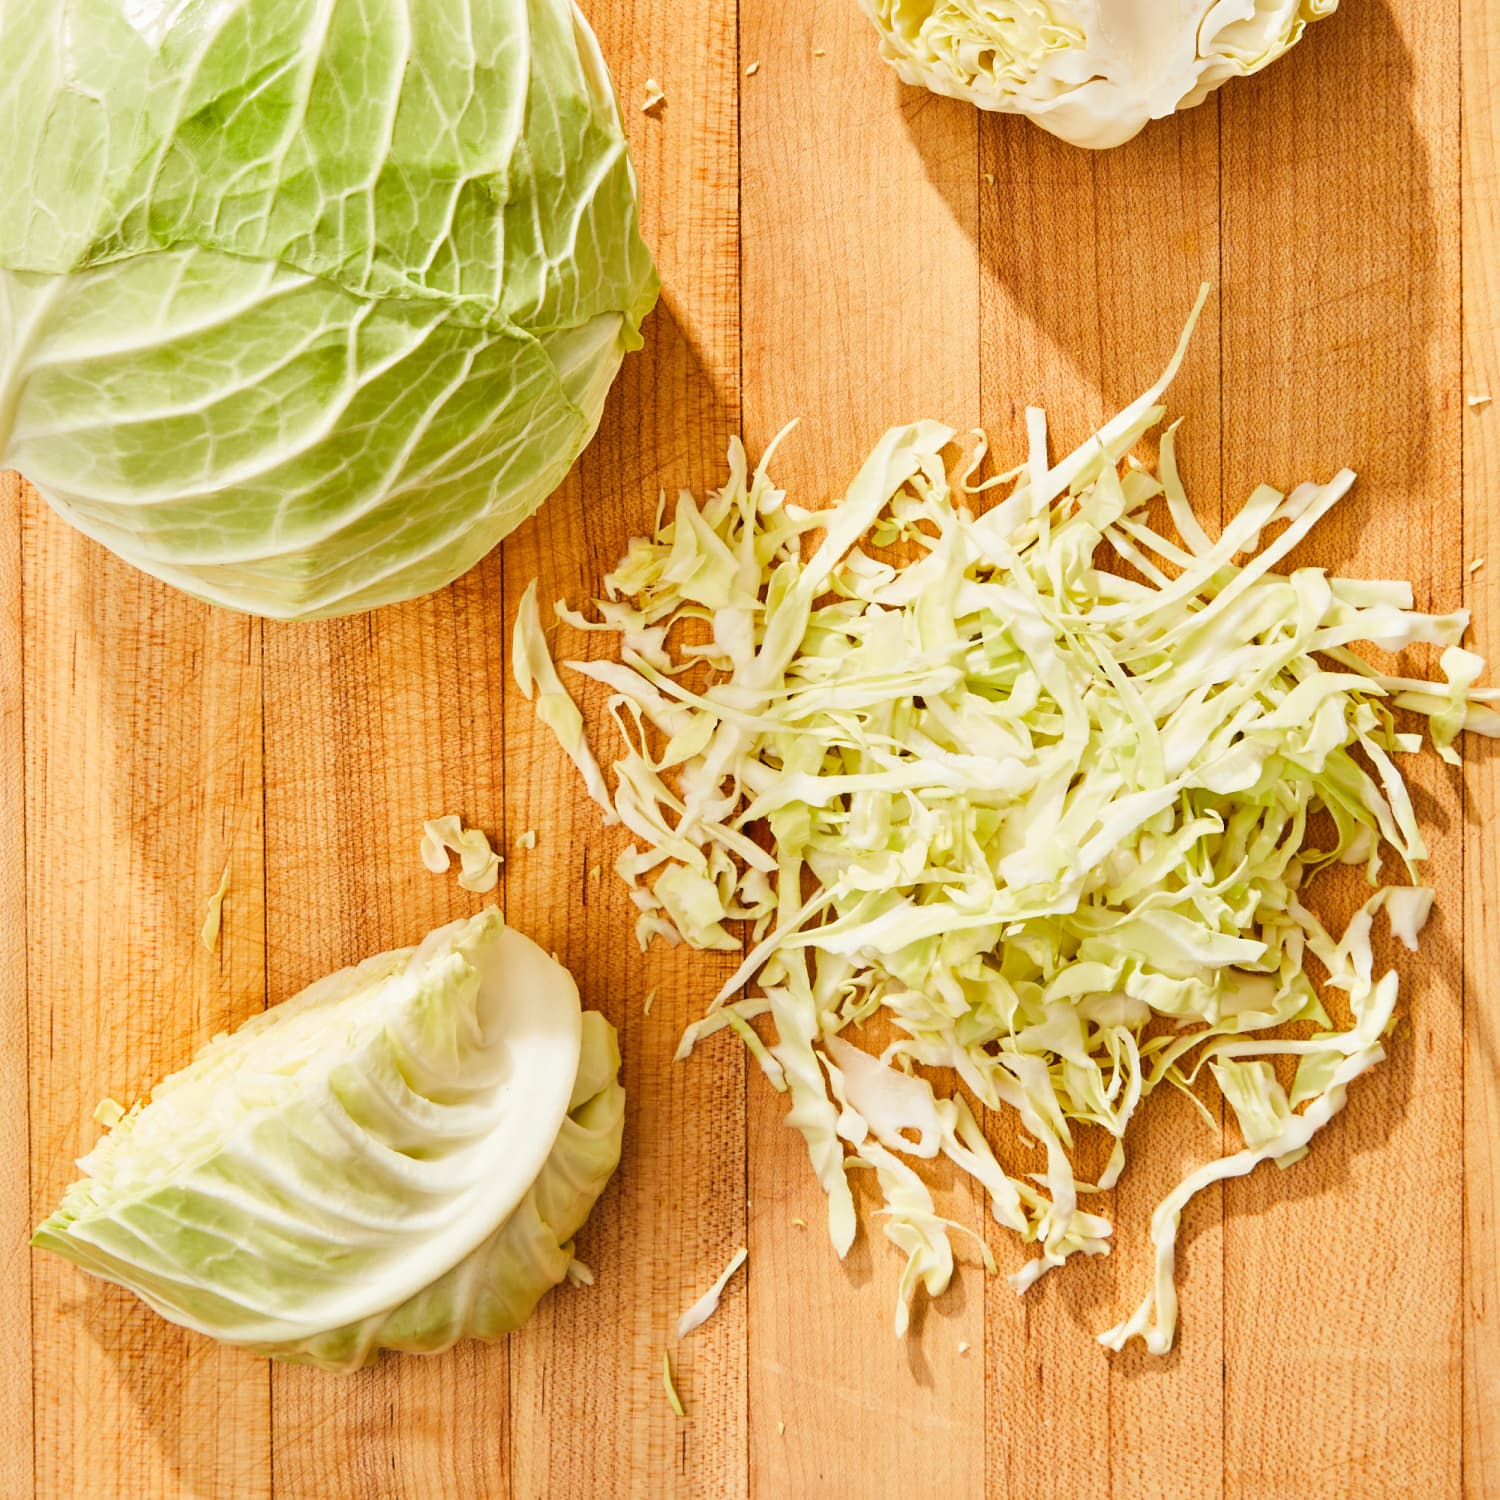 https://cdn.apartmenttherapy.info/image/upload/f_jpg,q_auto:eco,c_fill,g_auto,w_1500,ar_1:1/k%2FPhoto%2FTips%2F2023-02-How-to-Cut-Cabbage%2FHow-to-cut-cabbage-295